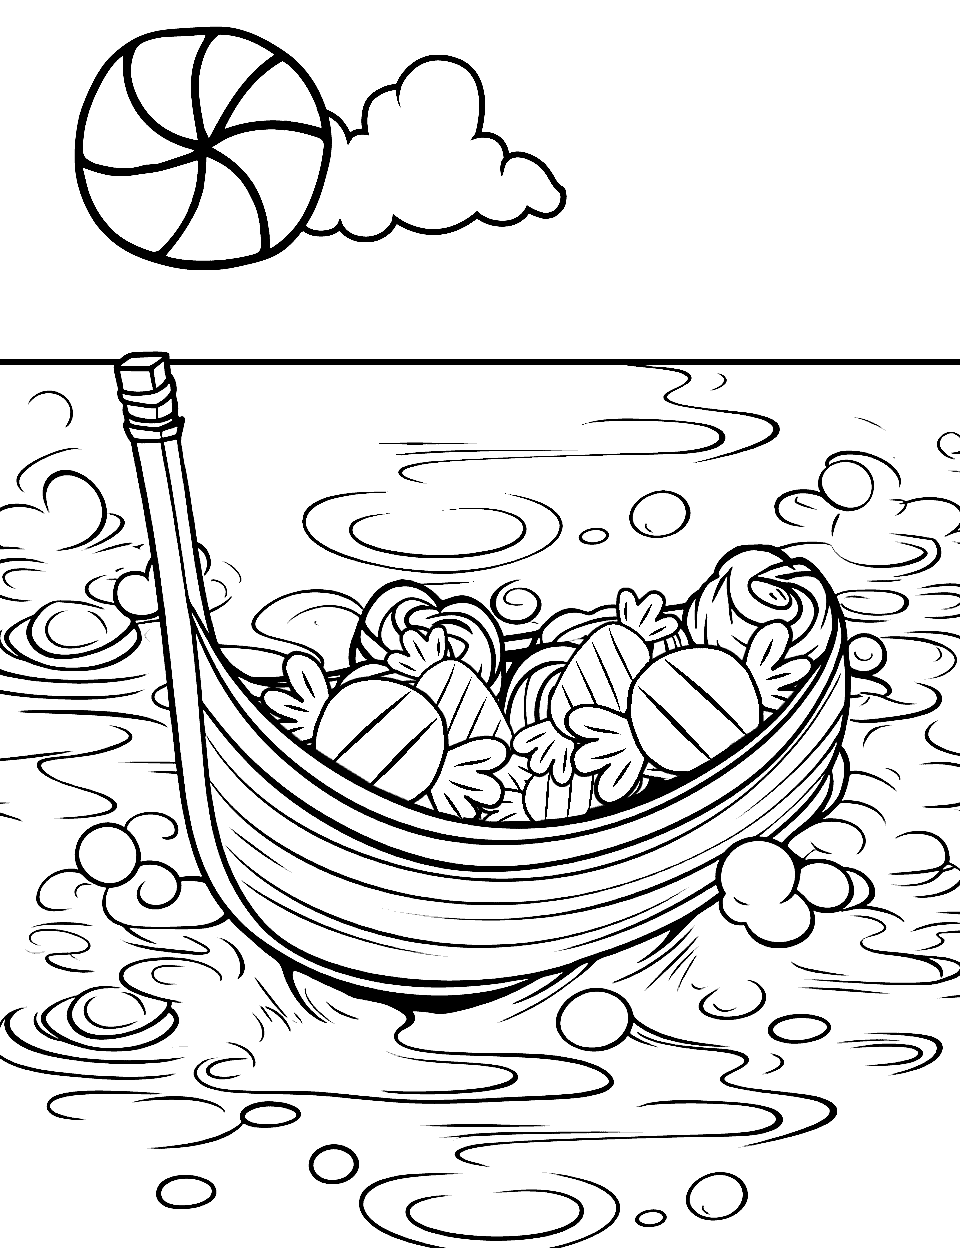 Chocolate River Adventure Candy Coloring Page - A small boat carrying candy floating on a river made entirely of flowing chocolate.